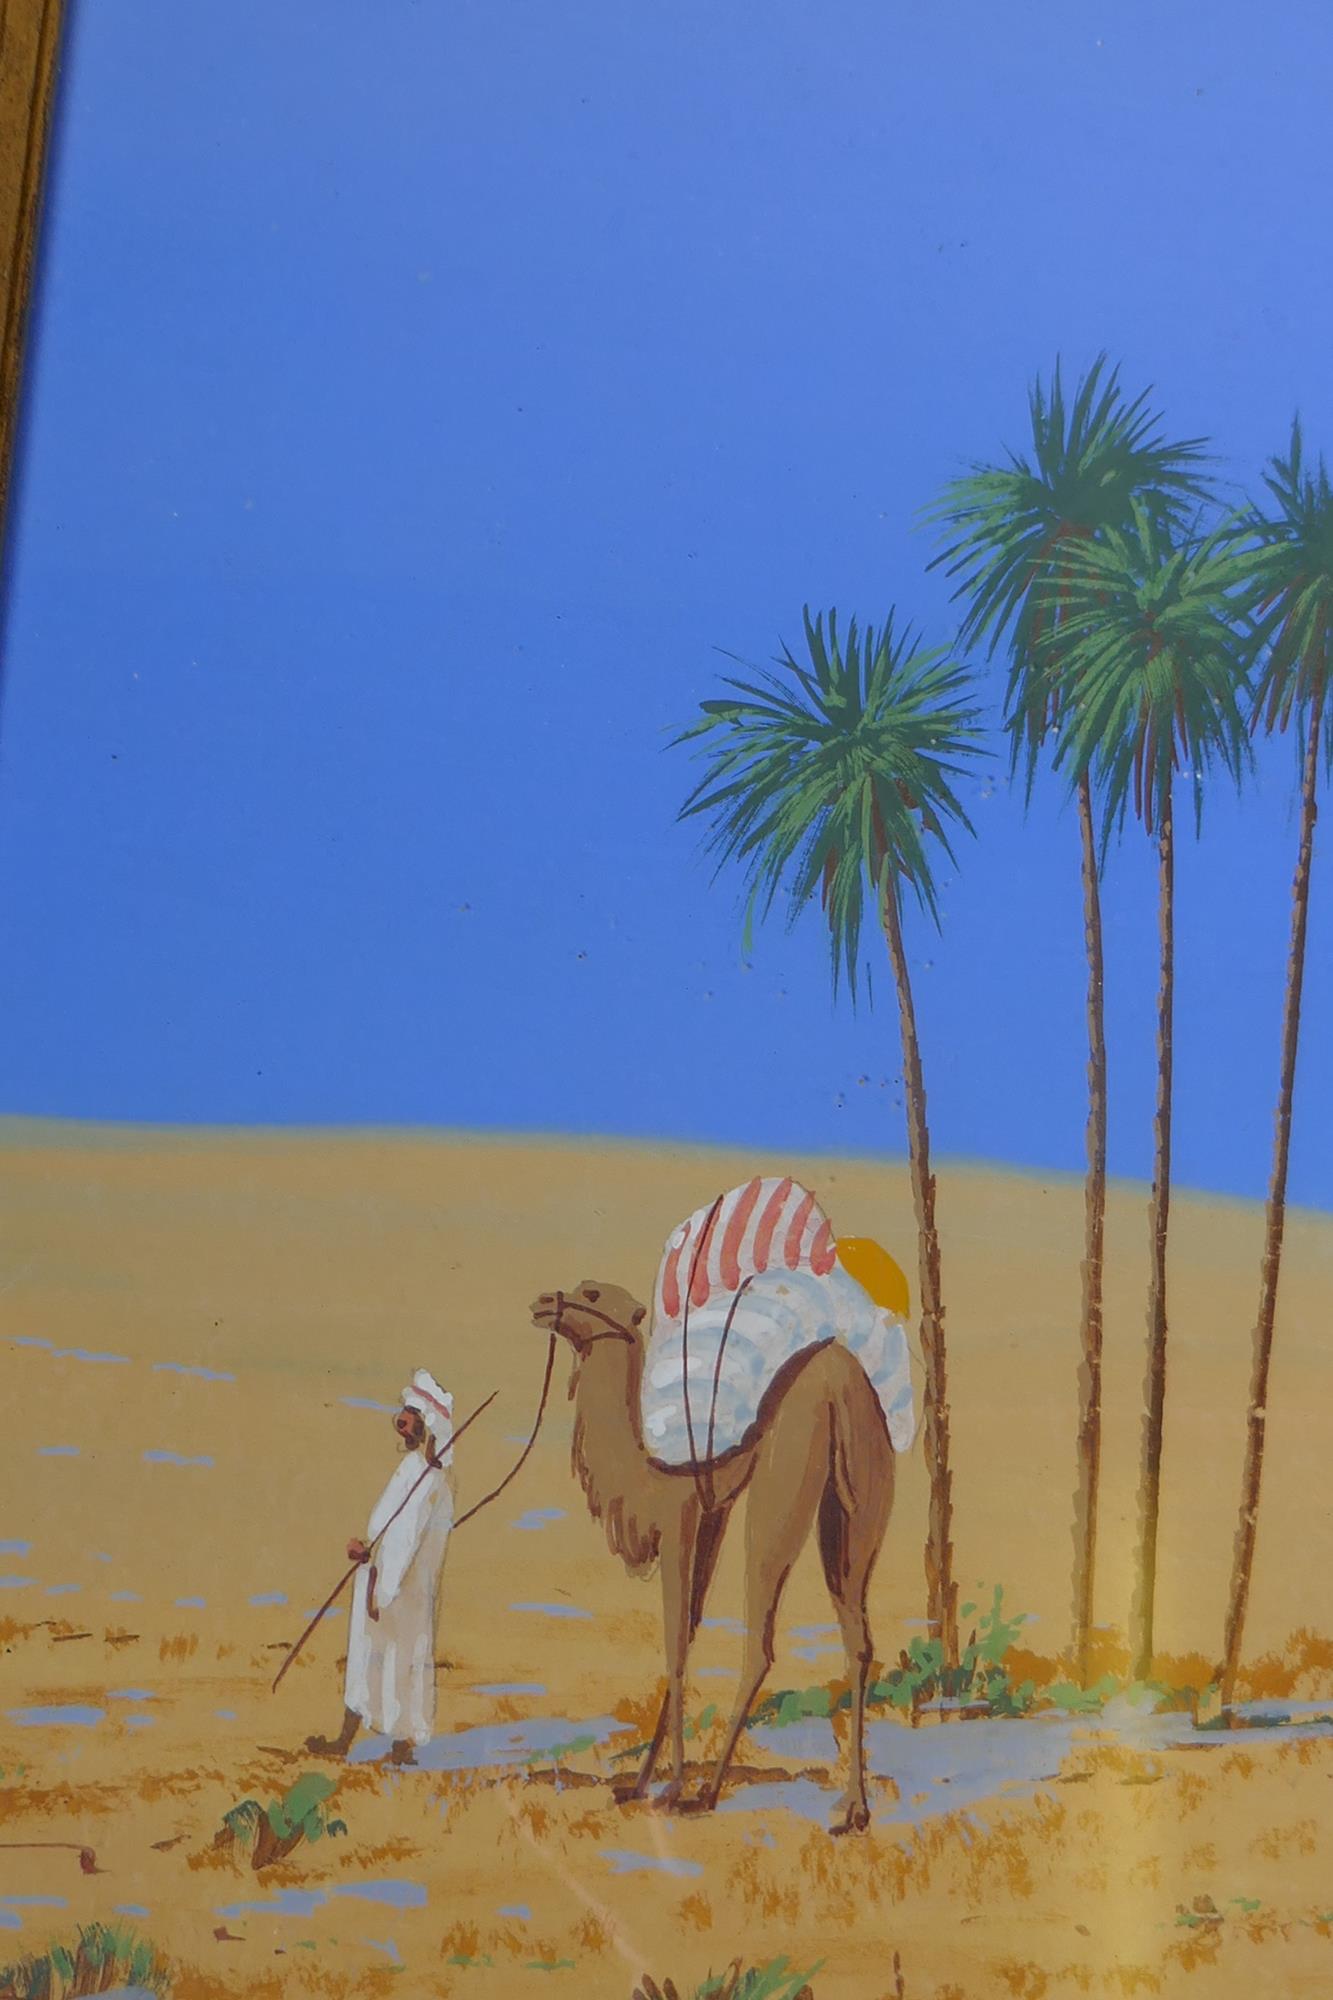 M. Dean, five desert landscapes with Arabs and camels, gouache on paper, largest 45 x 33cm - Image 6 of 8